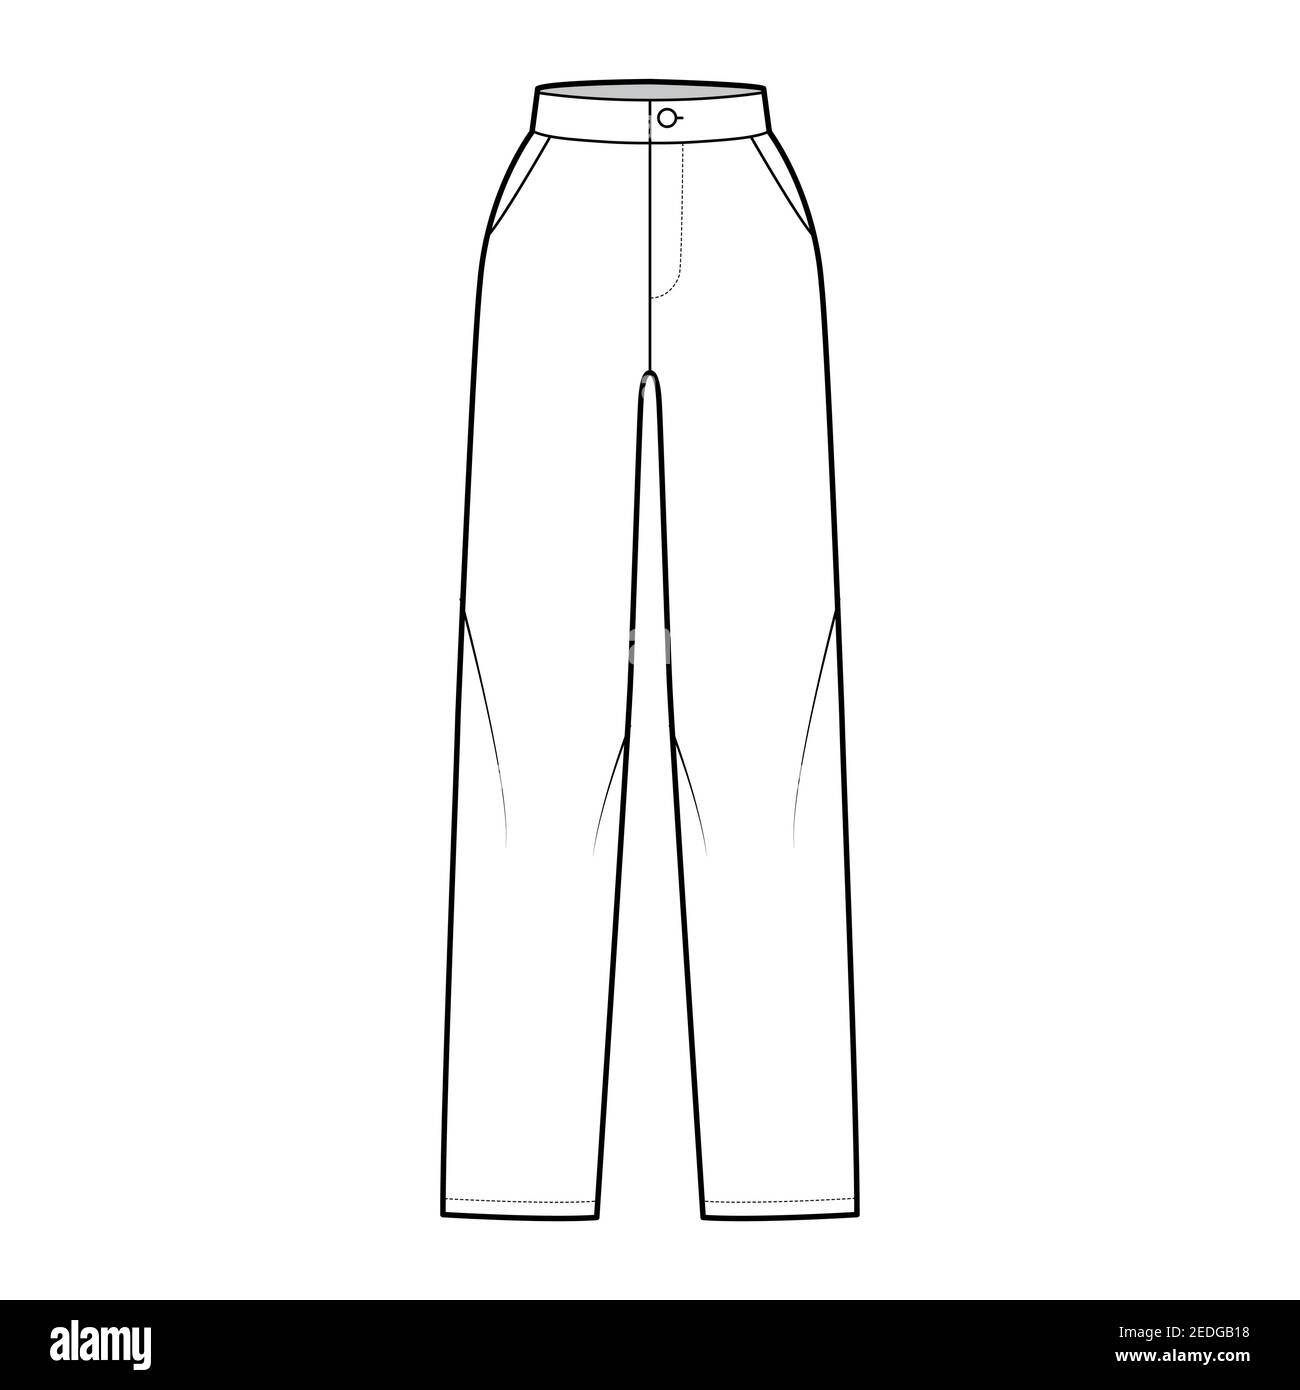 Pants Fashion Flat Sketch Template Stock Vector (Royalty Free) 1356415385 |  Shutterstock